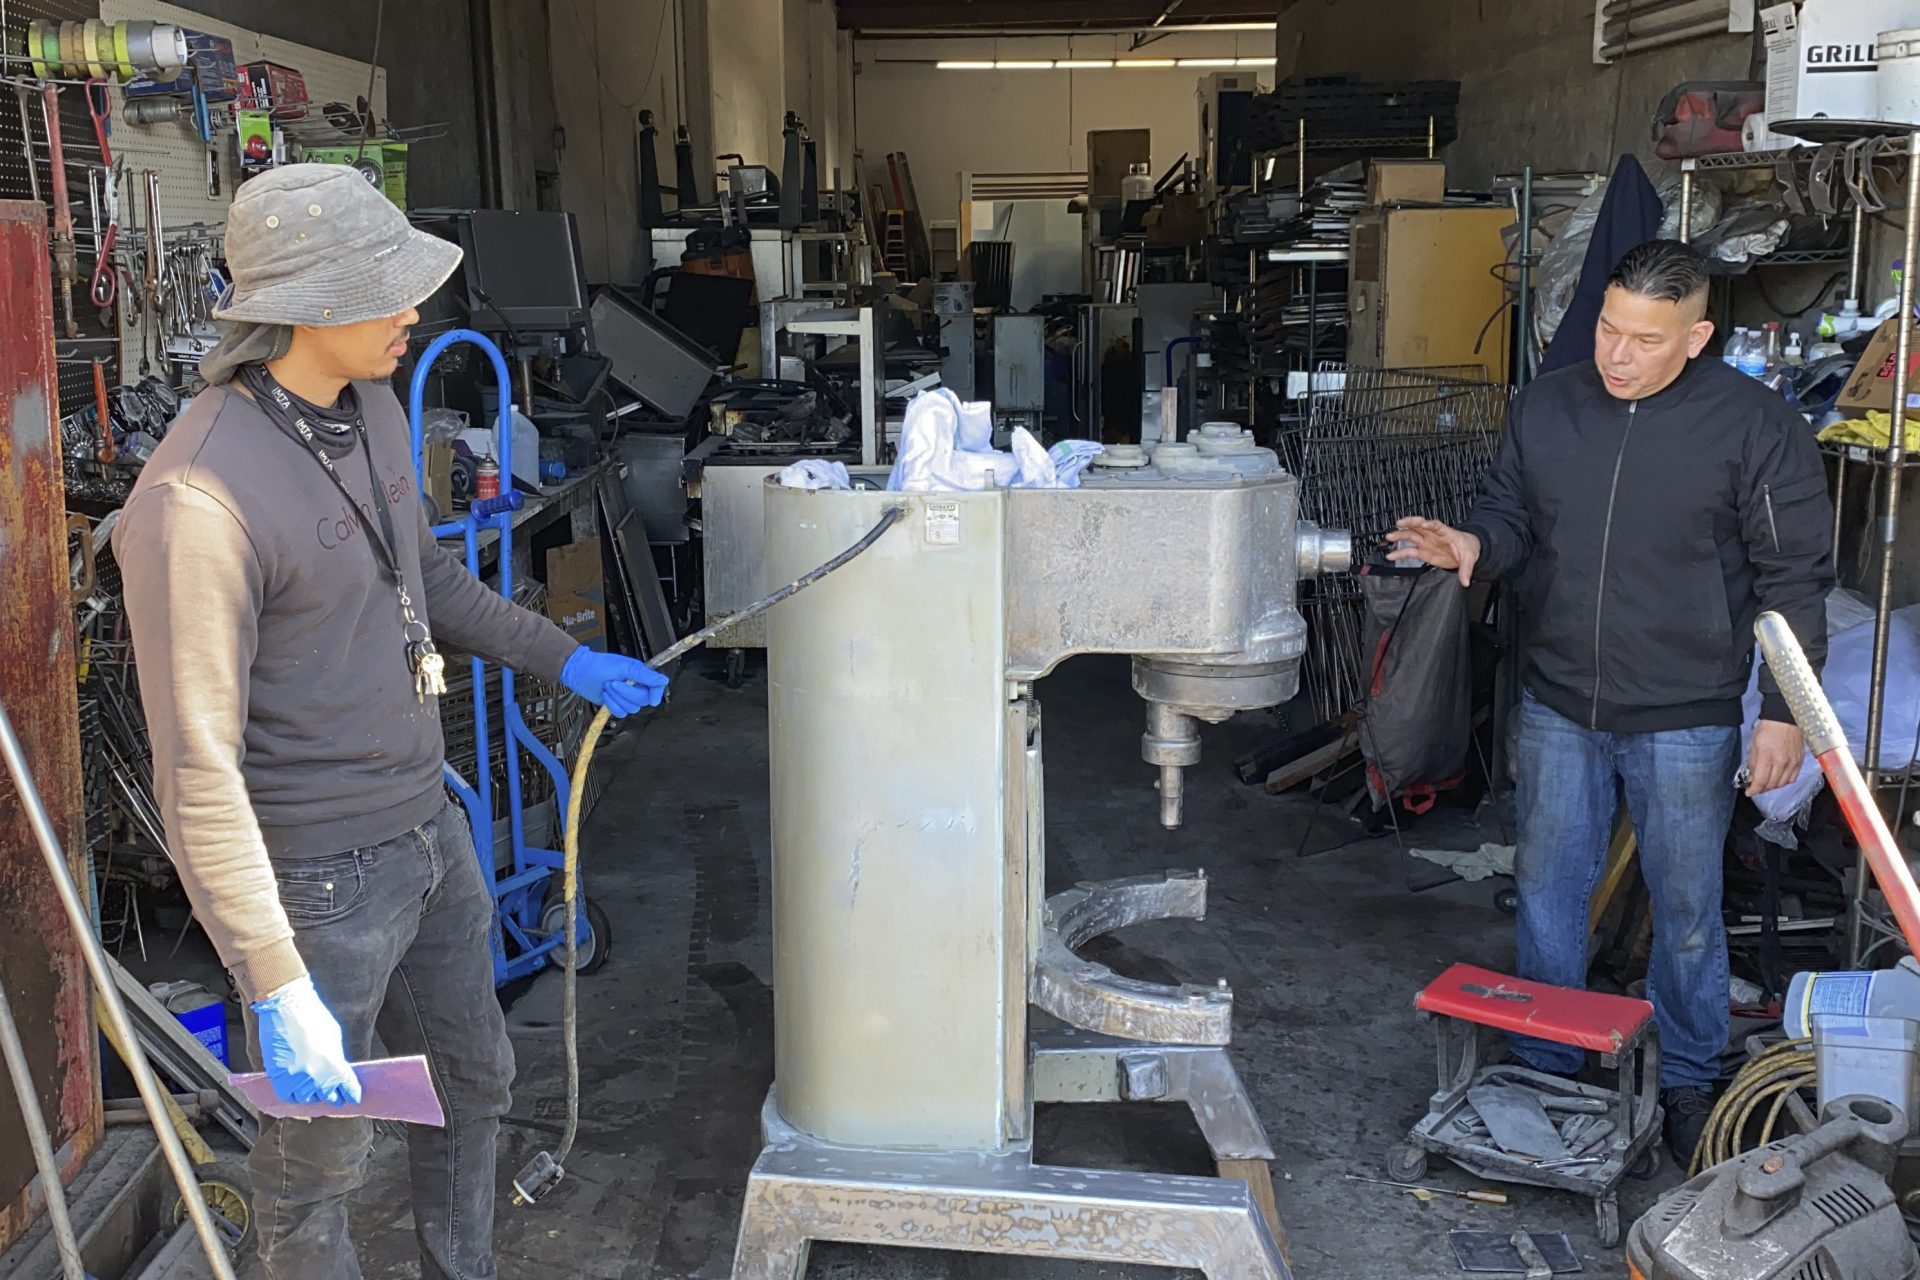 Jose Bonilla Jr., right, talks to an employee about cleaning a used industrial mixer for sale at the warehouse of his family's business, American Restaurant Supply in San Leandro, Calif., on Jan. 14, 2021.